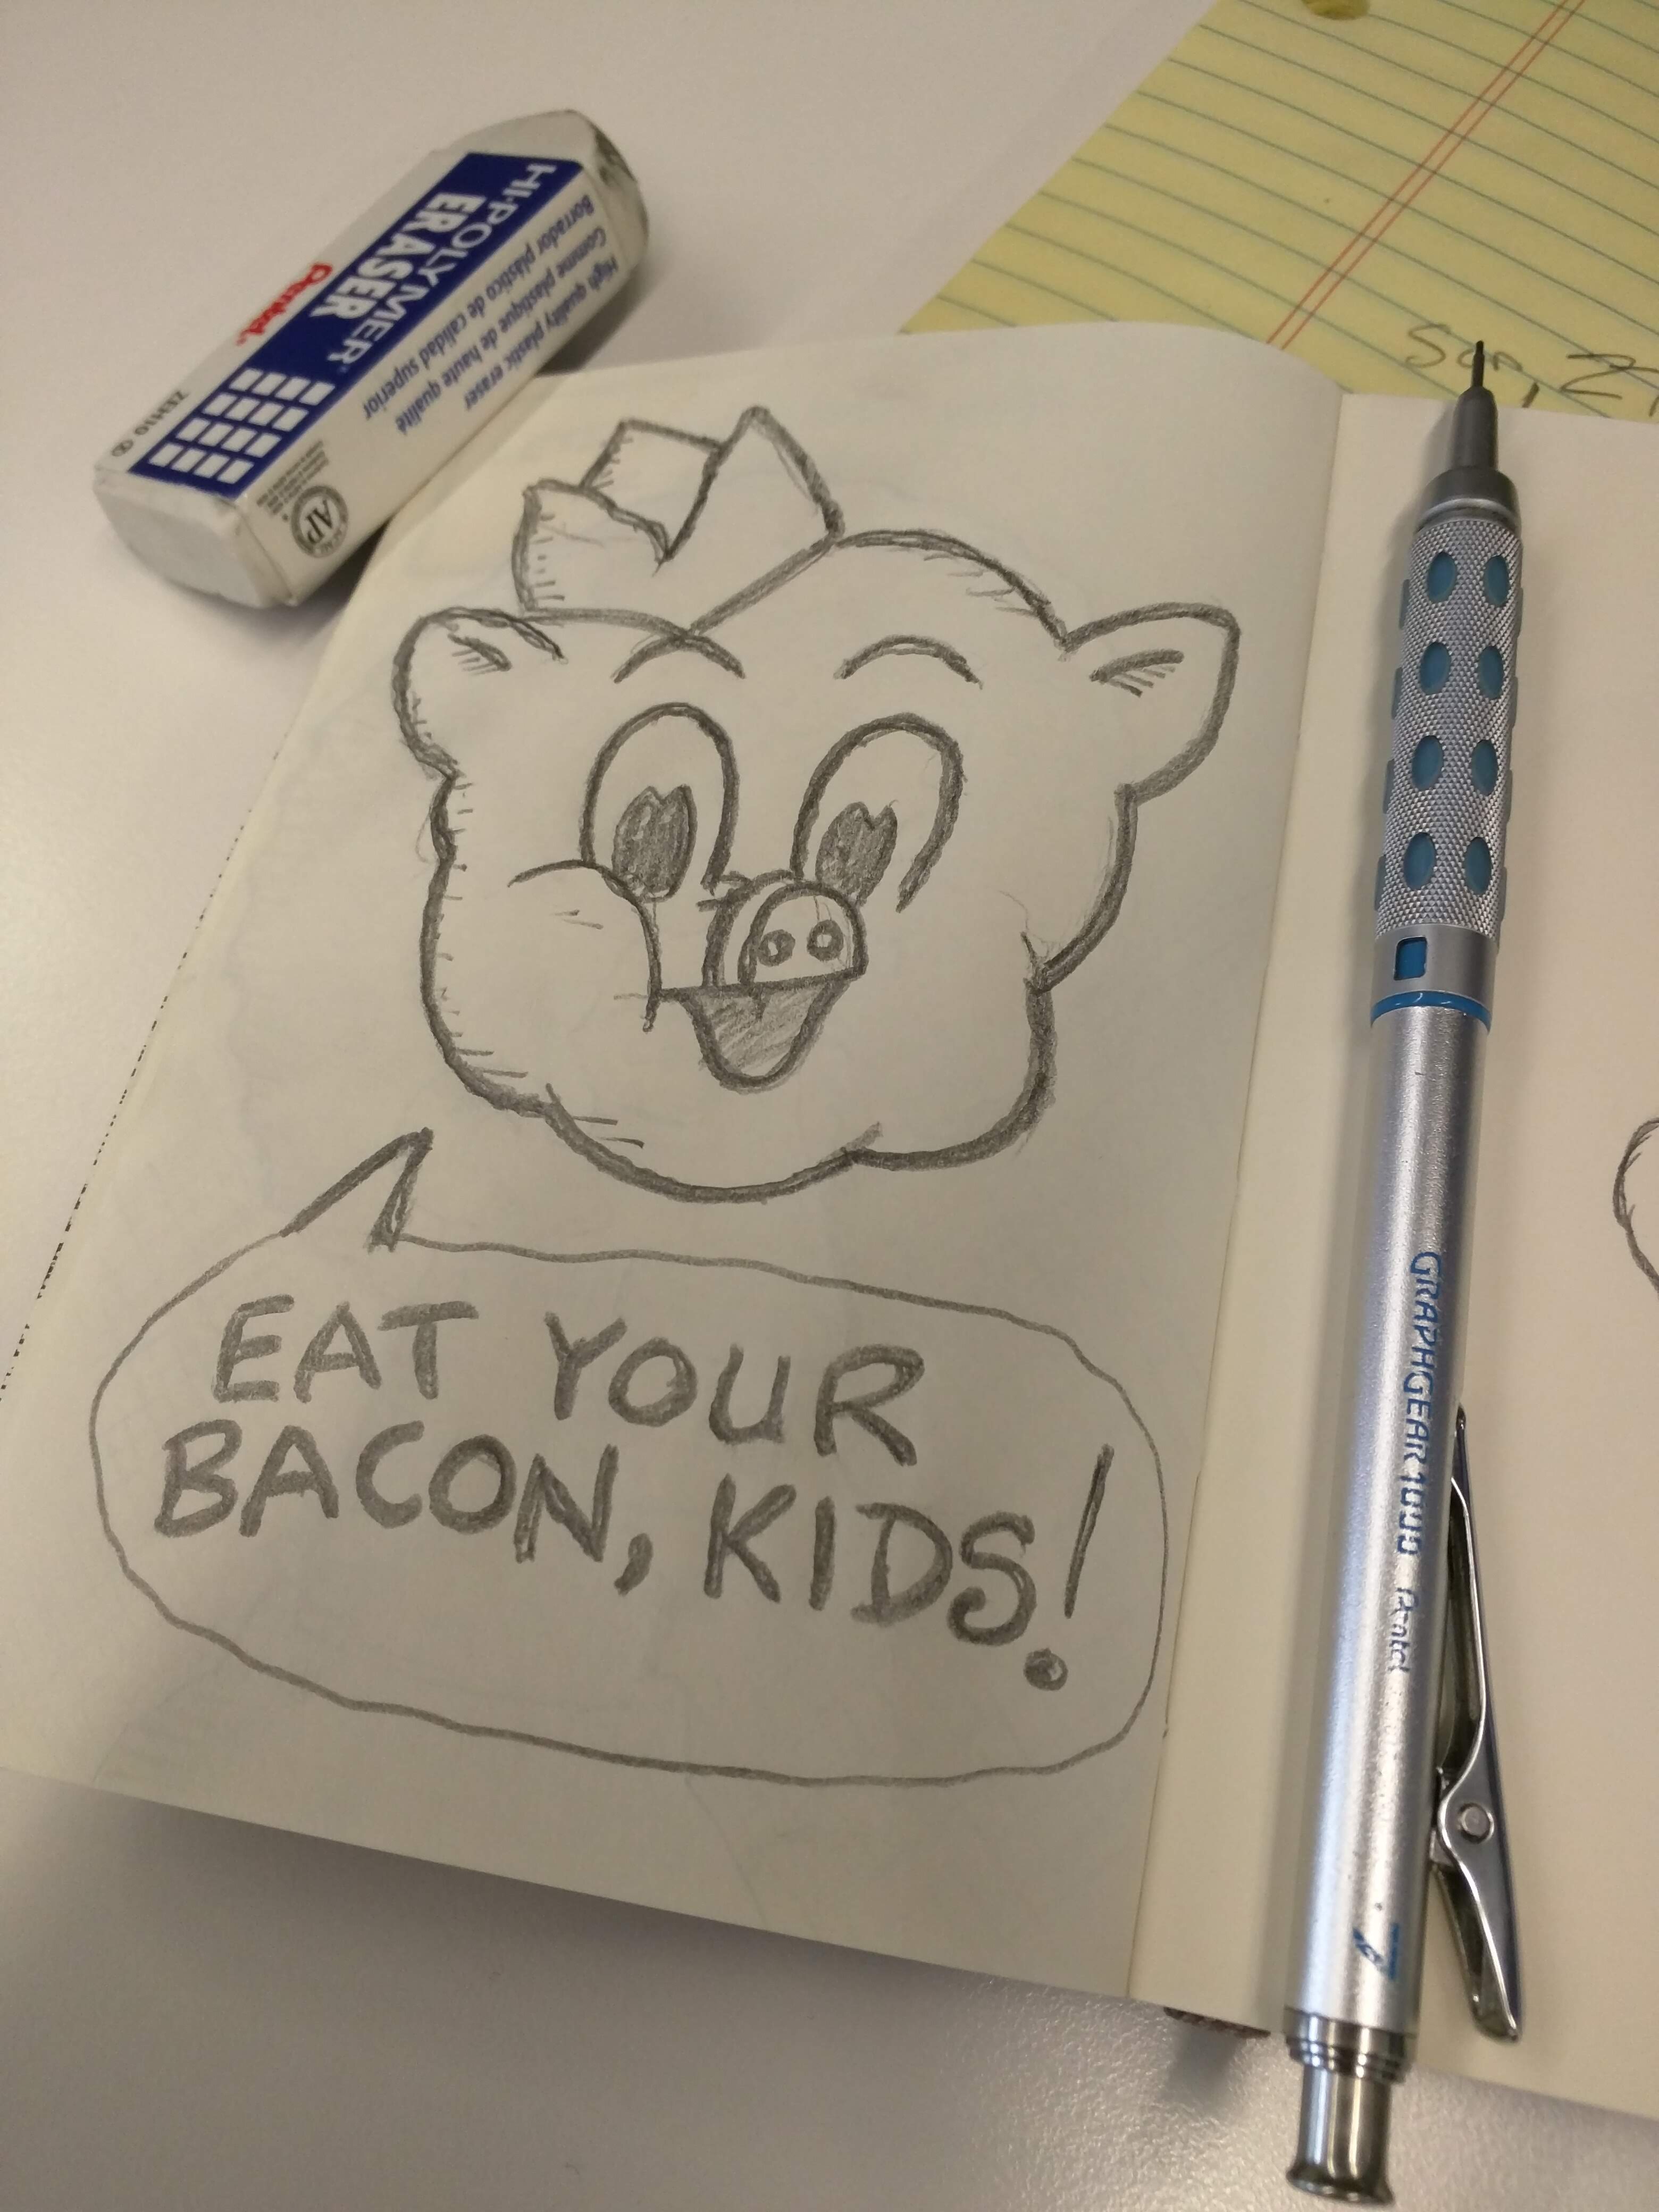 a cartoon of a pig telling us to eat bacon